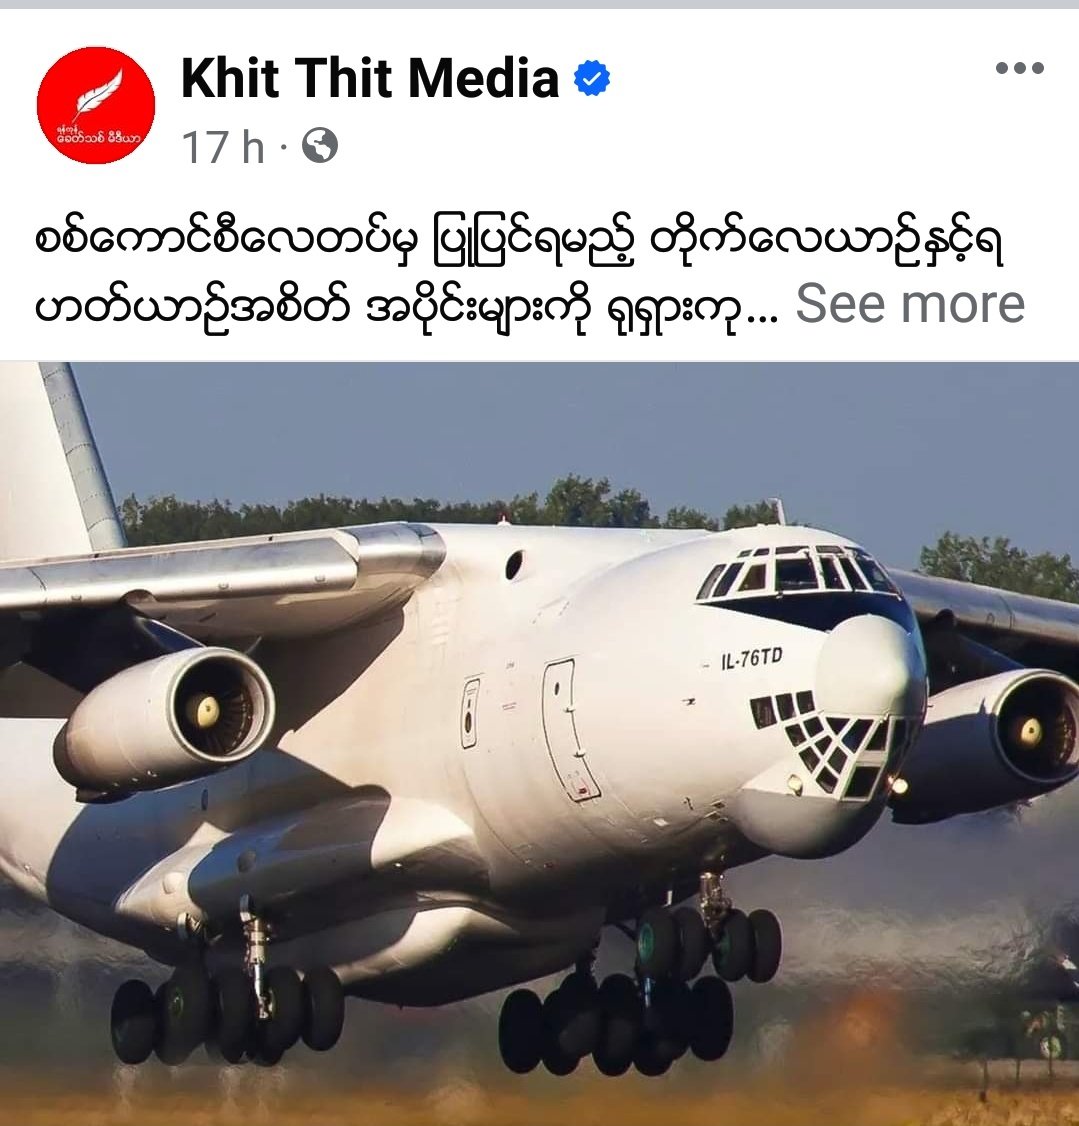 A military source in Nay Pyi Taw said that a Russian cargo plane IL76 came to Nay Pyi Taw Alar Air Force Base to transport parts of fighter jets and helicopters to be repaired by the Air Force of the Terrorist Military Council.
@UN @ASEAN @EUCouncil
@POTUS
#BanJetFuelExportsToMM